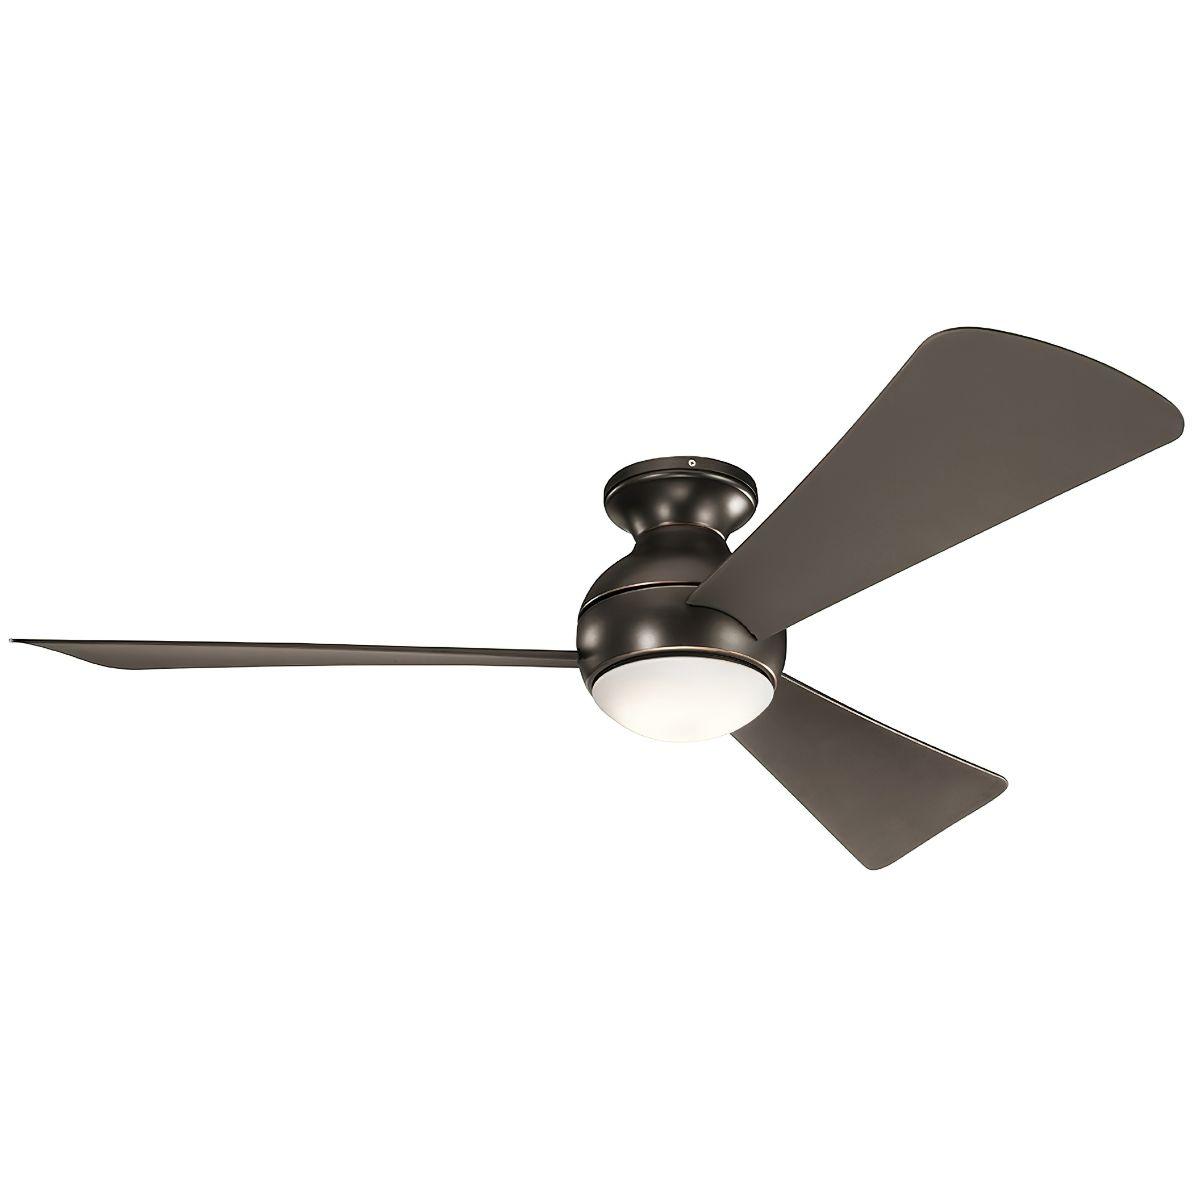 Sola 54 Inch Propeller Outdoor Ceiling Fan With Light, Wall Control Included